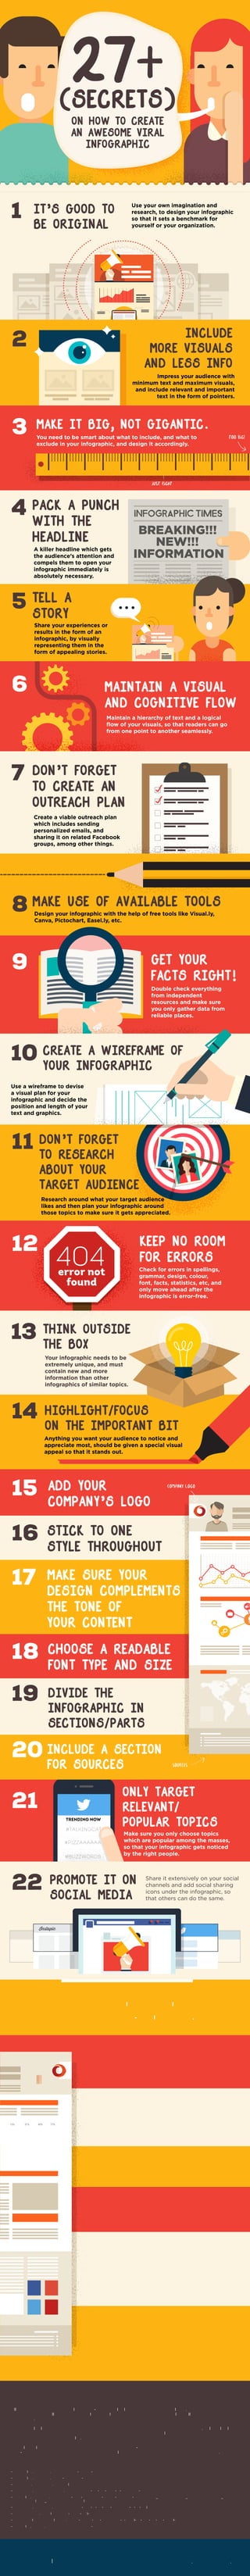 27+(Secrets)
on How To Create
an Awesome Viral
Infographic
It's Good To Be Original11 It’s good to
be original
Include
More Visuals
and Less Info
2
Make it Big, Not Gigantic.3
Pack a Punch
with the
Headline
4
Use your own imagination and
research, to design your infographic
so that it sets a benchmark for
yourself or your organization.
Impress your audience with
minimum text and maximum visuals,
and include relevant and important
text in the form of pointers.
You need to be smart about what to include, and what to
exclude in your infographic, and design it accordingly.
A killer headline which gets
the audience’s attention and
compels them to open your
infographic immediately is
absolutely necessary.
INFOGRAPHIC TIMES
BREAKING!!!
INFORMATION
NEW!!!
Only Target
Relevant/
Popular Topics
TRENDING NOW
#TALKINGCAT
#PIZZAAAAAA
#BUZZWORDS
#CATVIDEOS
Make sure you only choose topics
which are popular among the masses,
so that your infographic gets noticed
by the right people.
JUST RIGHT
TOO BIG!
TELL A
STORY
Share your experiences or
results in the form of an
infographic, by visually
representing them in the
form of appealing stories.
5
Maintain a visual
and cognitive flow
Maintain a hierarchy of text and a logical
ﬂow of your visuals, so that readers can go
from one point to another seamlessly.
6
Don't Forget
to create an
Outreach plan
7
Create a viable outreach plan
which includes sending
personalized emails, and
sharing it on related Facebook
groups, among other things.
Think outside
the box
Your infographic needs to be
extremely unique, and must
contain new and more
information than other
infographics of similar topics.
13
404error not
found
12 Keep No Room
For Errors
Check for errors in spellings,
grammar, design, colour,
font, facts, statistics, etc, and
only move ahead after the
infographic is error-free.
15 Add your
company’s LOGO
16 Stick to one
style throughout
18 Choose a Readable
Font Type and Size
17
21
14 Highlight/Focus
On the Important Bit
Anything you want your audience to notice and
appreciate most, should be given a special visual
appeal so that it stands out.
19 Divide the
Infographic in
Sections/Parts
20 include a section
for sources
COMPANY LOGO
sources
Make Sure Your
Design Complements
the Tone of
Your Content
Generate a Strong
Emotion Through
the Infographic
Show Data in the
Form of Graphs
and Charts
Provide a Call-
To-Action Button
Release a Social
Media Copy Along
with a Press
Release
Submit Your
Infographic to
Infographic-Specific
Directories
Make the Infographic
Interactive
PROMOTE IT ON
SOCIAL MEDIA
Share it extensively on your social
channels and add social sharing
icons under the infographic, so
that others can do the same.
Put extra emphasis on the design
elements, and include keywords into the
accompanying text to create an
SEO-friendly infographic.
23 Take care
of SEO
22
make use of available tools
Design your infographic with the help of free tools like Visual.ly,
Canva, Pictochart, Easel.ly, etc.
8
9 Get your
facts right!
Double check everything
from independent
resources and make sure
you only gather data from
reliable places.
Create a Wireframe of
Your Infographic
Use a wireframe to devise
a visual plan for your
infographic and decide the
position and length of your
text and graphics.
10
11 Don't Forget
to Research
About Your
Target Audience
Research around what your target audience
likes and then plan your infographic around
those topics to make sure it gets appreciated.
All the information in this checklist is error-free and reliable to the best of our knowledge. However, Capsicum
Mediaworks, LLP shall not be accountable for any loss or damage suffered as a result of following these
instructions.
We are not liable for any manufacturing in the referenced software or services stated in this work. Unless clearly
mentioned, we receive no commissions or payments from the respective suppliers or owners of the software and
services mentioned in this checklist.
We only publish information about the workings of certain third-party services, but we do not endorse or support
third-party services or products and are not responsible for the functions or authenticity of these services.
Disclaimer:
Sources:
- https://blog.kissmetrics.com/infographic-warning-signs/
- https://blog.kissmetrics.com/12-infographic-tips/
- http://www.entrepreneur.com/article/229818
- https://www.smashingmagazine.com/2011/10/the-dos-and-donts-of-infographic-design/
- http://blog.supertasker.com/benefits-using-infographics-content-marketing-strategy/?utm_source=PCN&utm_campaign=3772&utm_
medium=email&utm_content=USD&ref=email
- https://www.quicksprout.com/2012/06/11/5-ways-to-get-your-infographic-to-go-viral/
- http://piktochart.com/blog/secrets-design-viral-infographics/
- http://digitalmarketingphilippines.com/10-reasons-why-infographics-is-useful-for-your-seo-and-digital-campaign/
- http://blog.hubspot.com/marketing/effectiveness-infographics
Brought to you by Capsicum Mediaworks
A Digital Marketing Agency www.capsicummediaworks.com
13% 31% 45% 77%
24
25
27
28
29
26
 